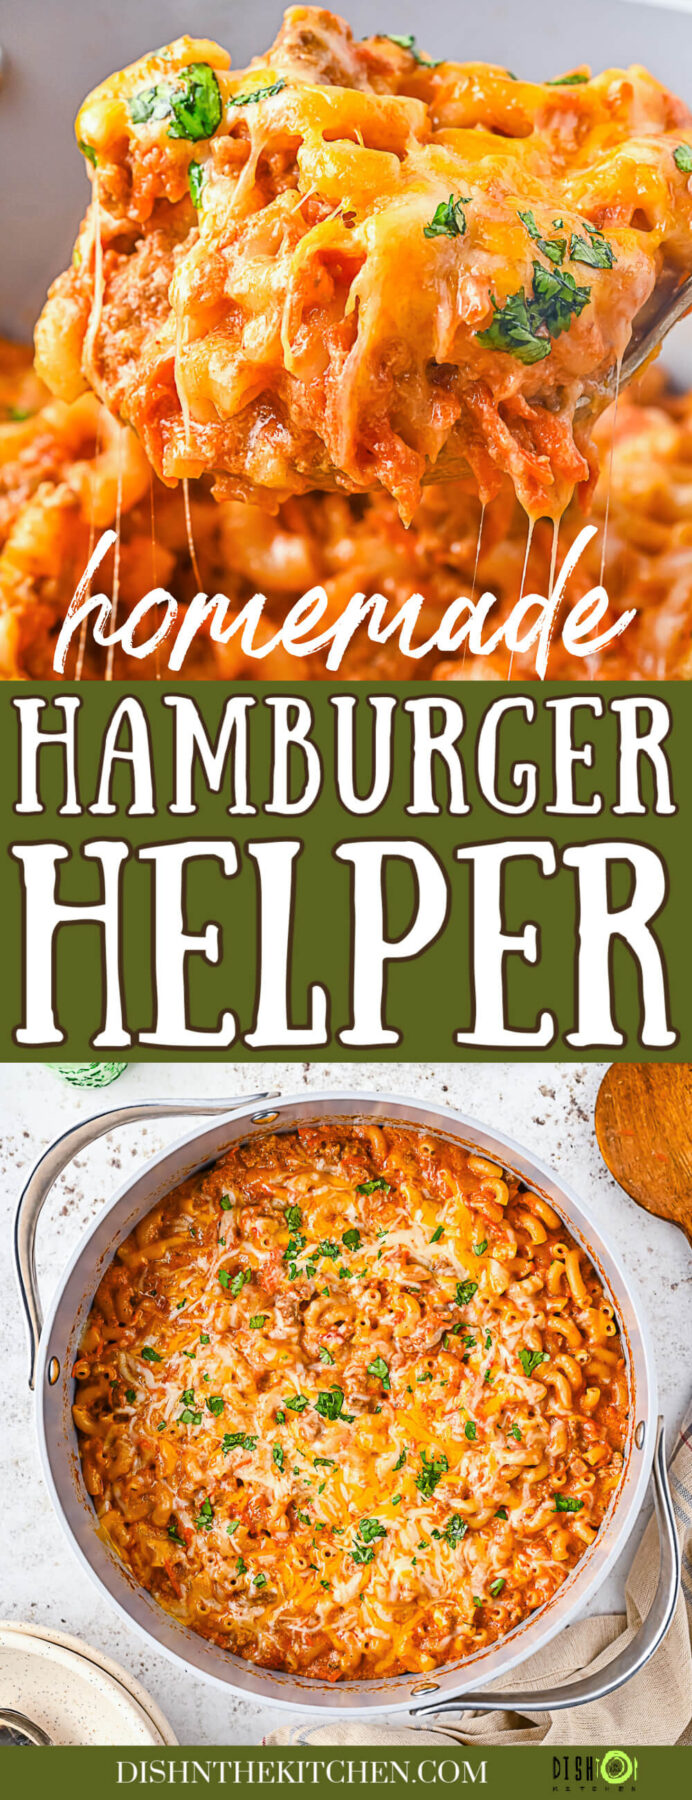 Pinterest image featuring creamy cheesy homemade hamburger helper in a large stainless steel saucepan.